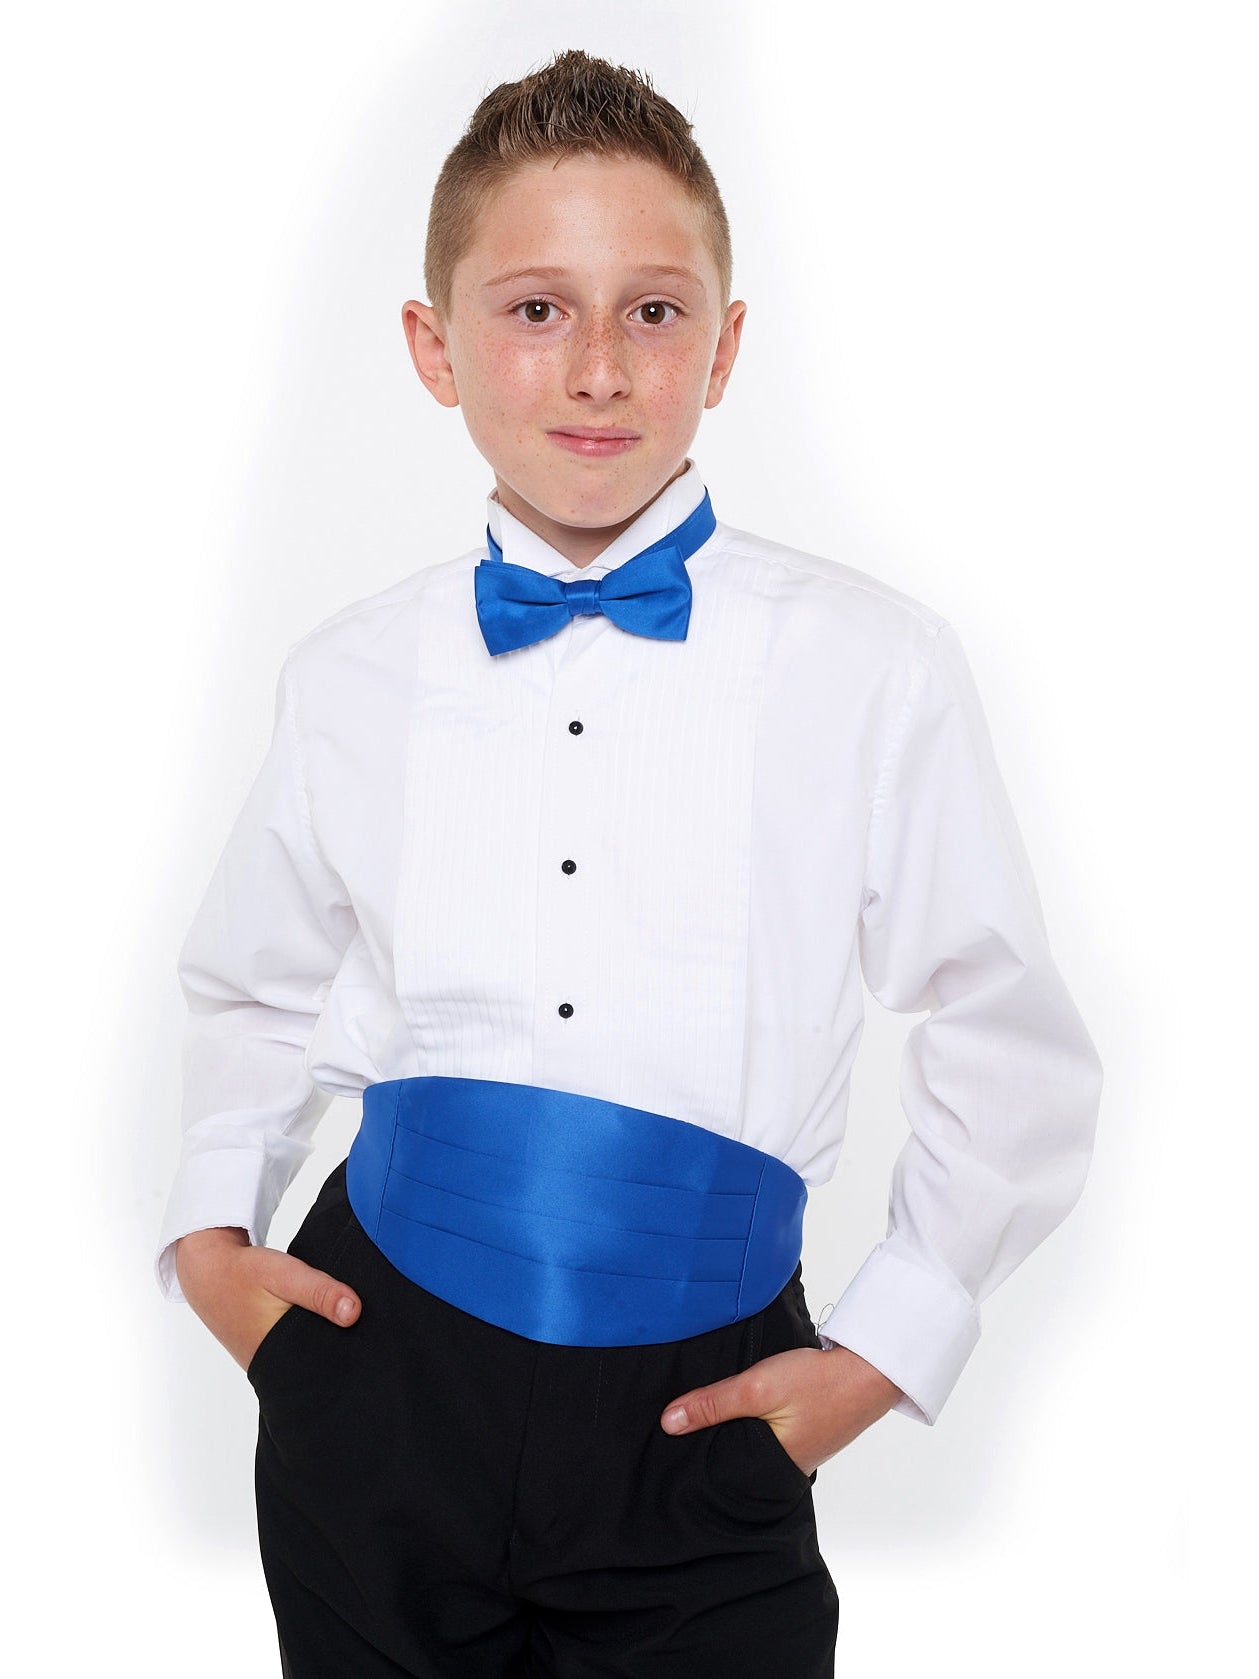 Tuxedo T-shirt with Blue Bow Tie on White